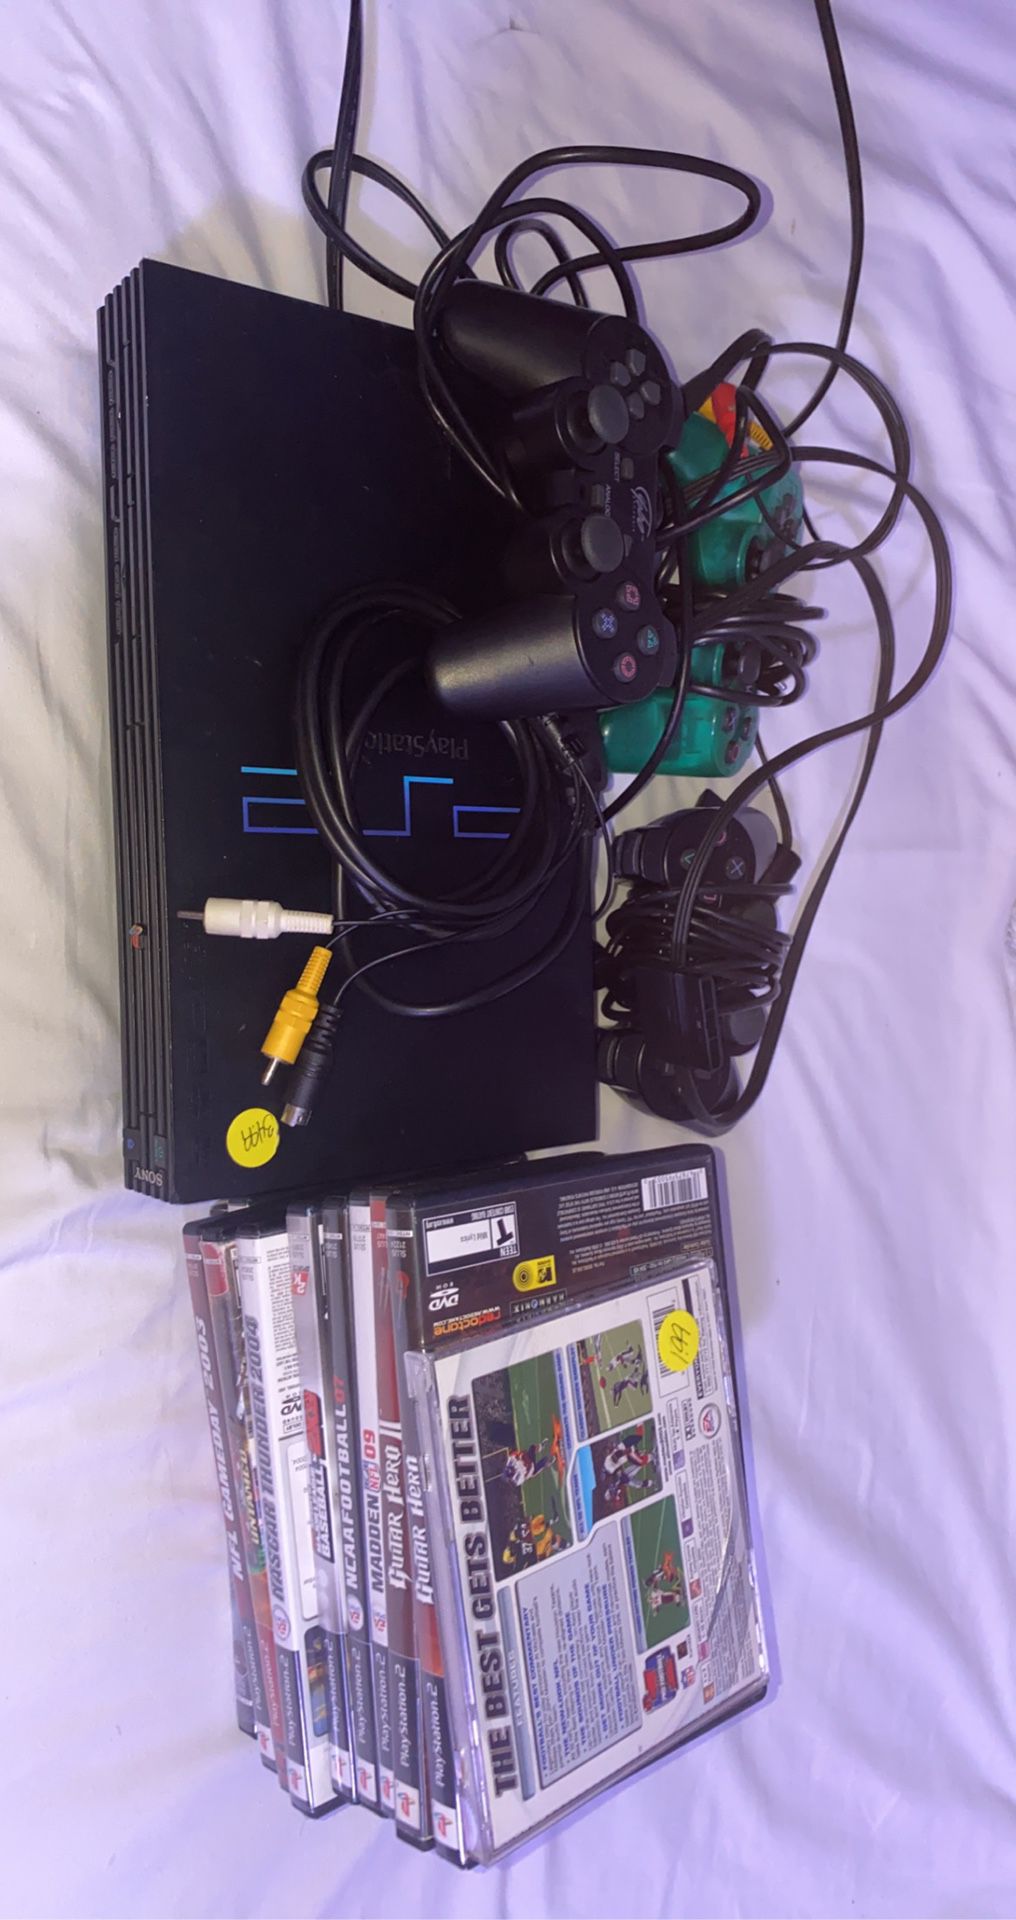 PS2 (3 controllers, 11 games)